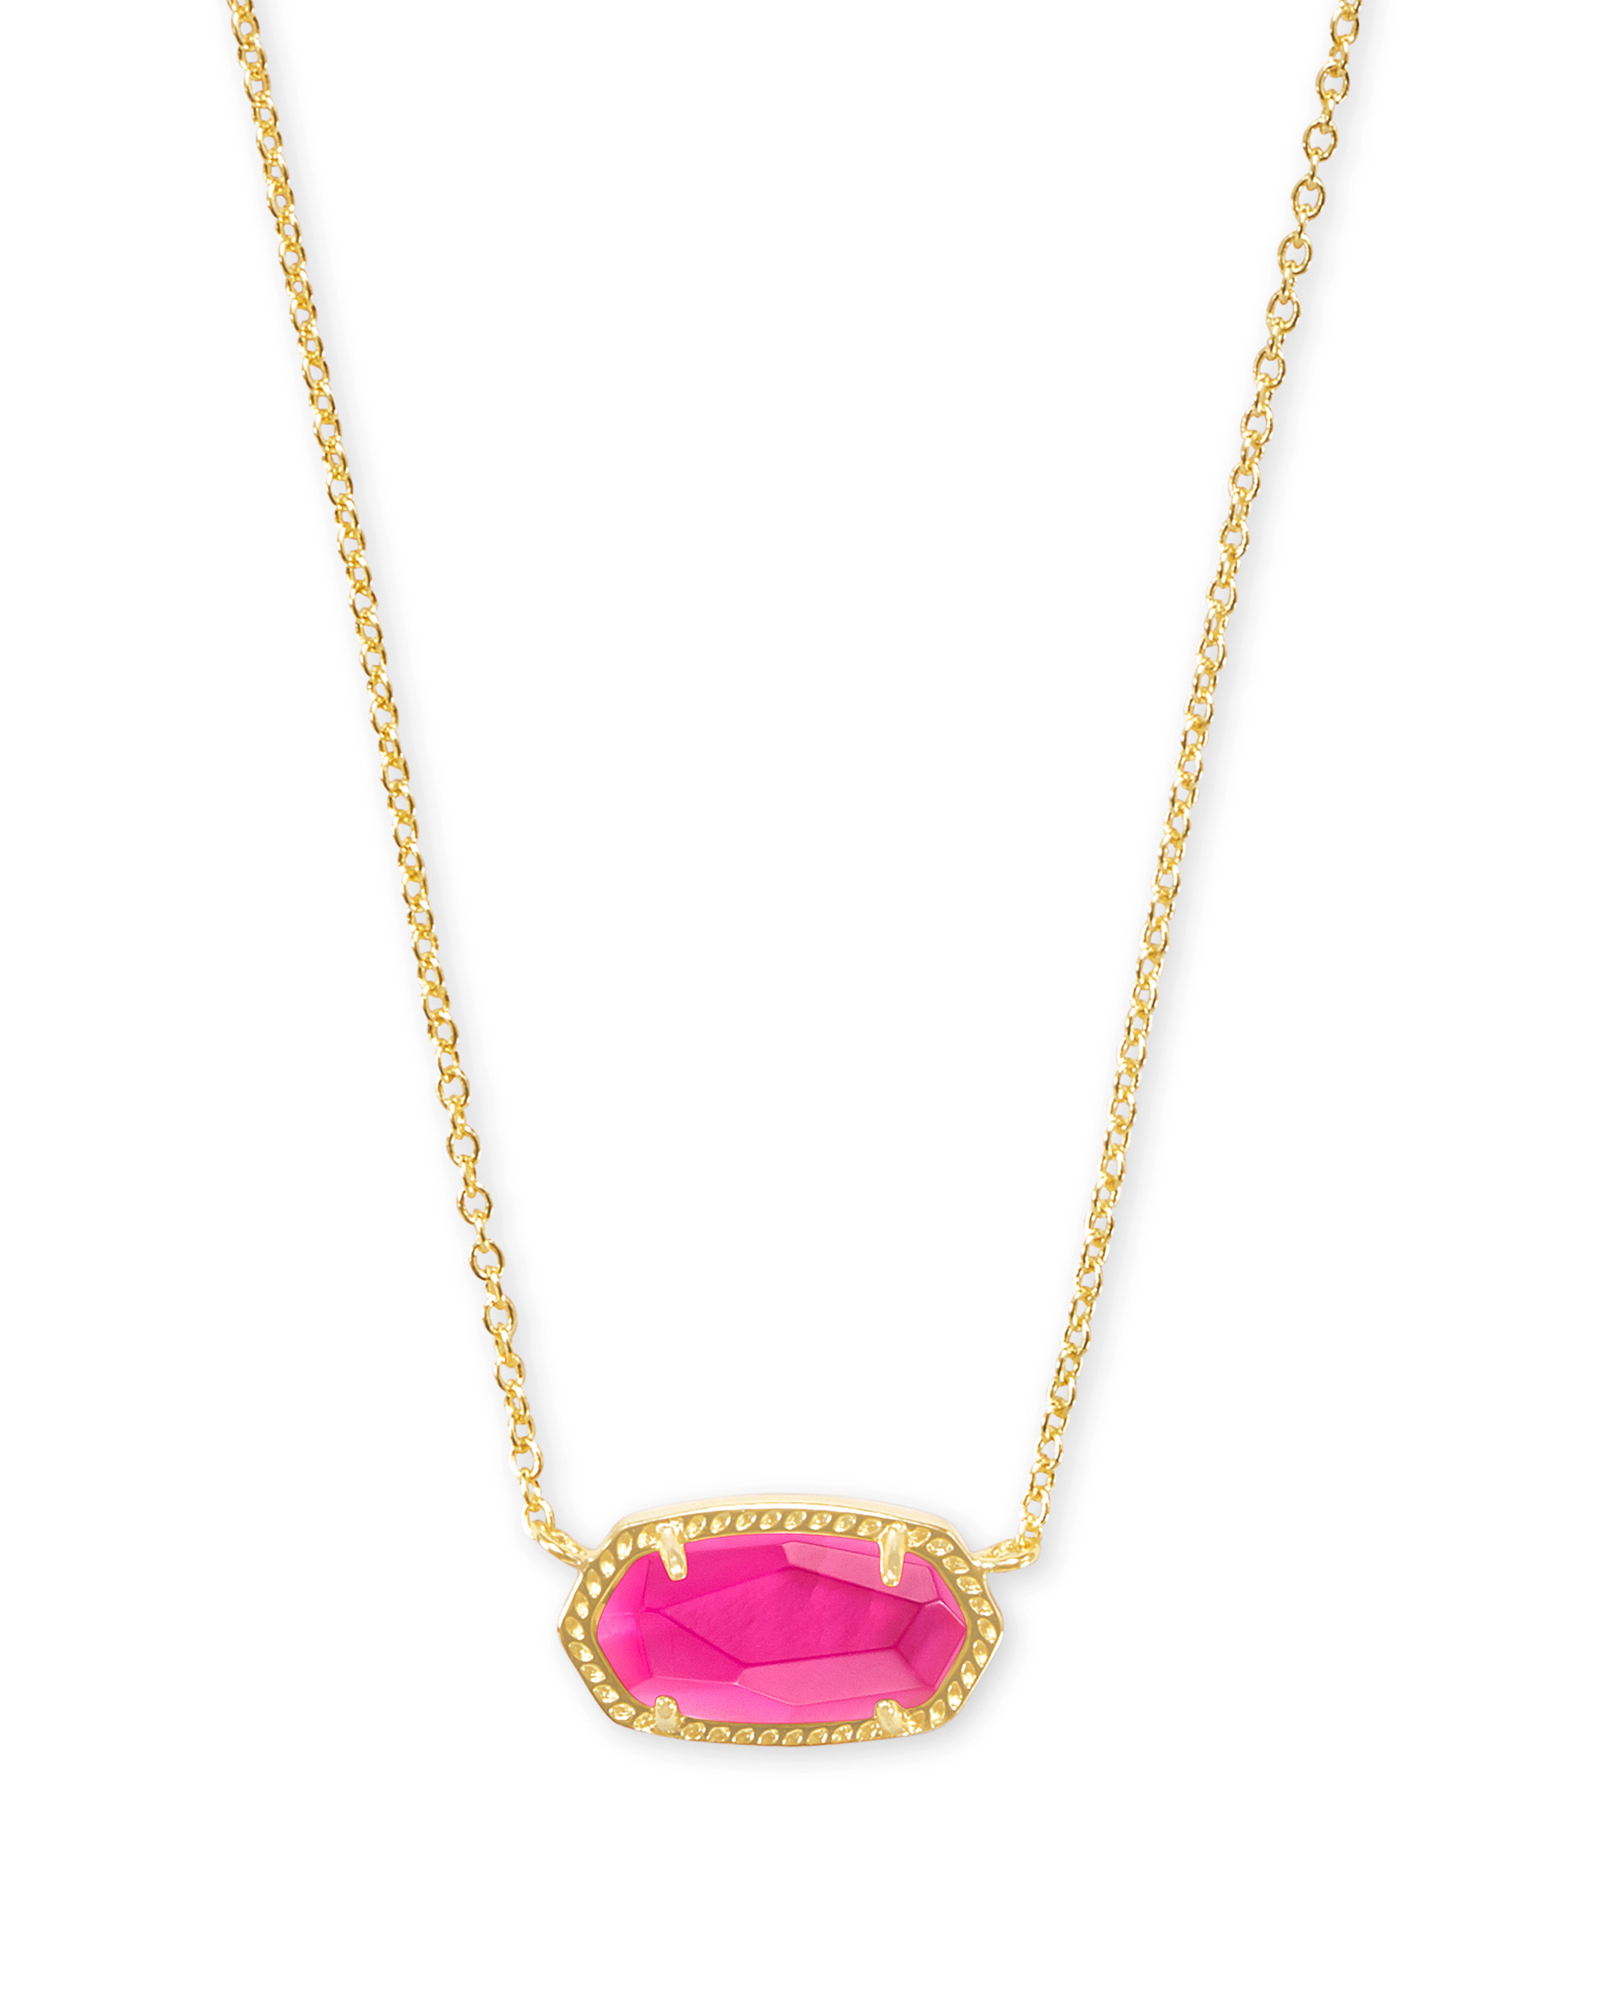 Kendra Scott Miley Necklace in Hot Pink Kyocera Simulated Opal, Gold-Plated  | REEDS Jewelers